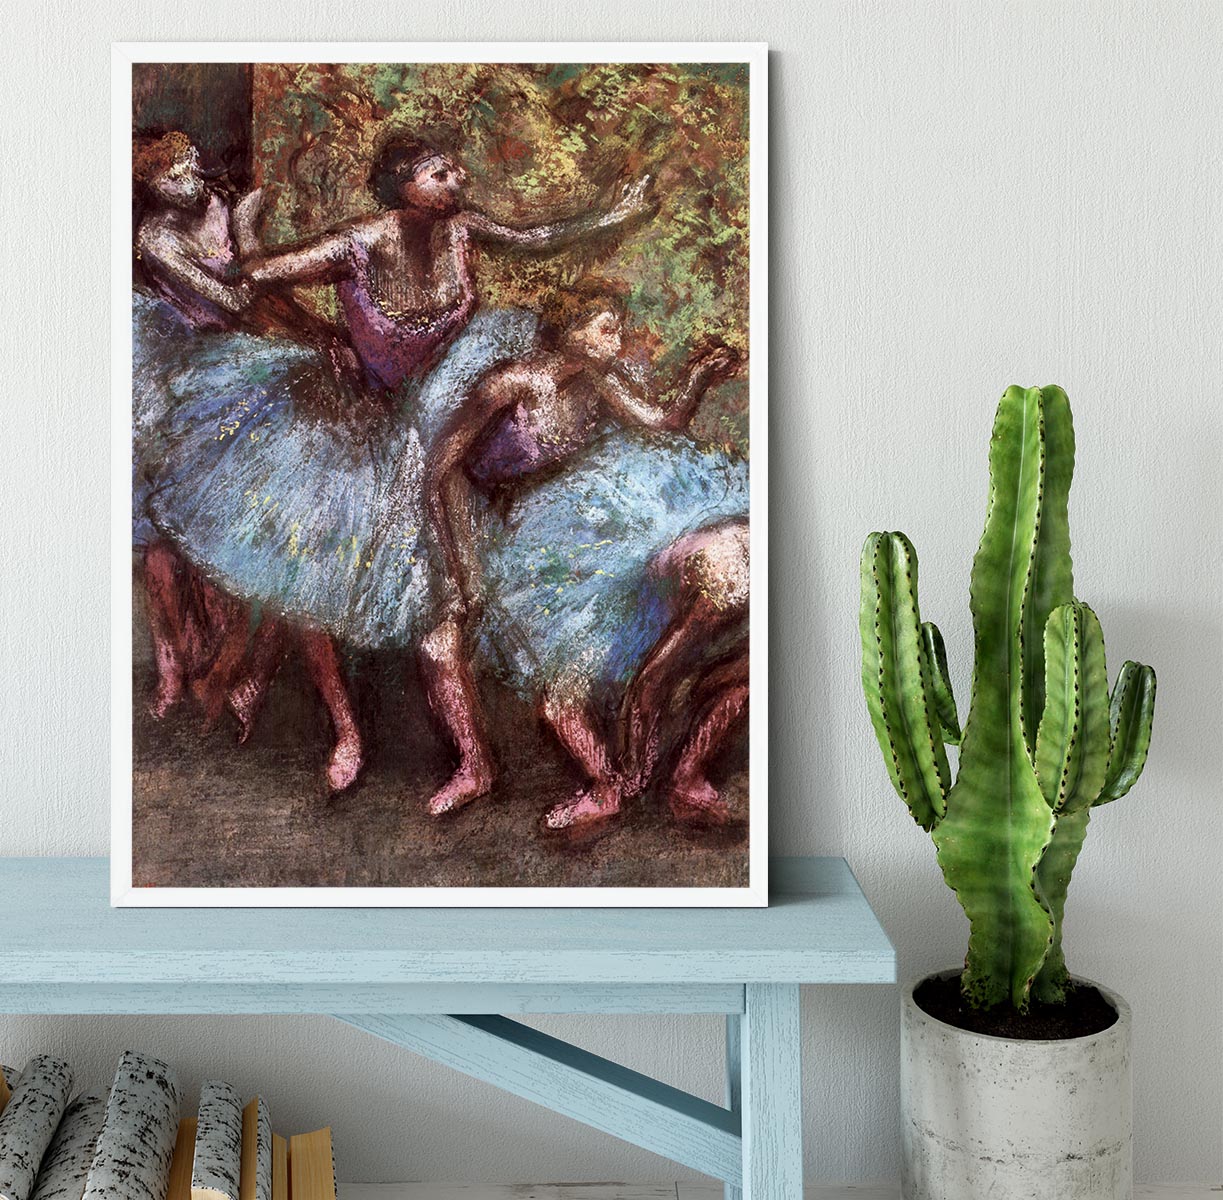 Four dancers behind the scenes 1 by Degas Framed Print - Canvas Art Rocks -6